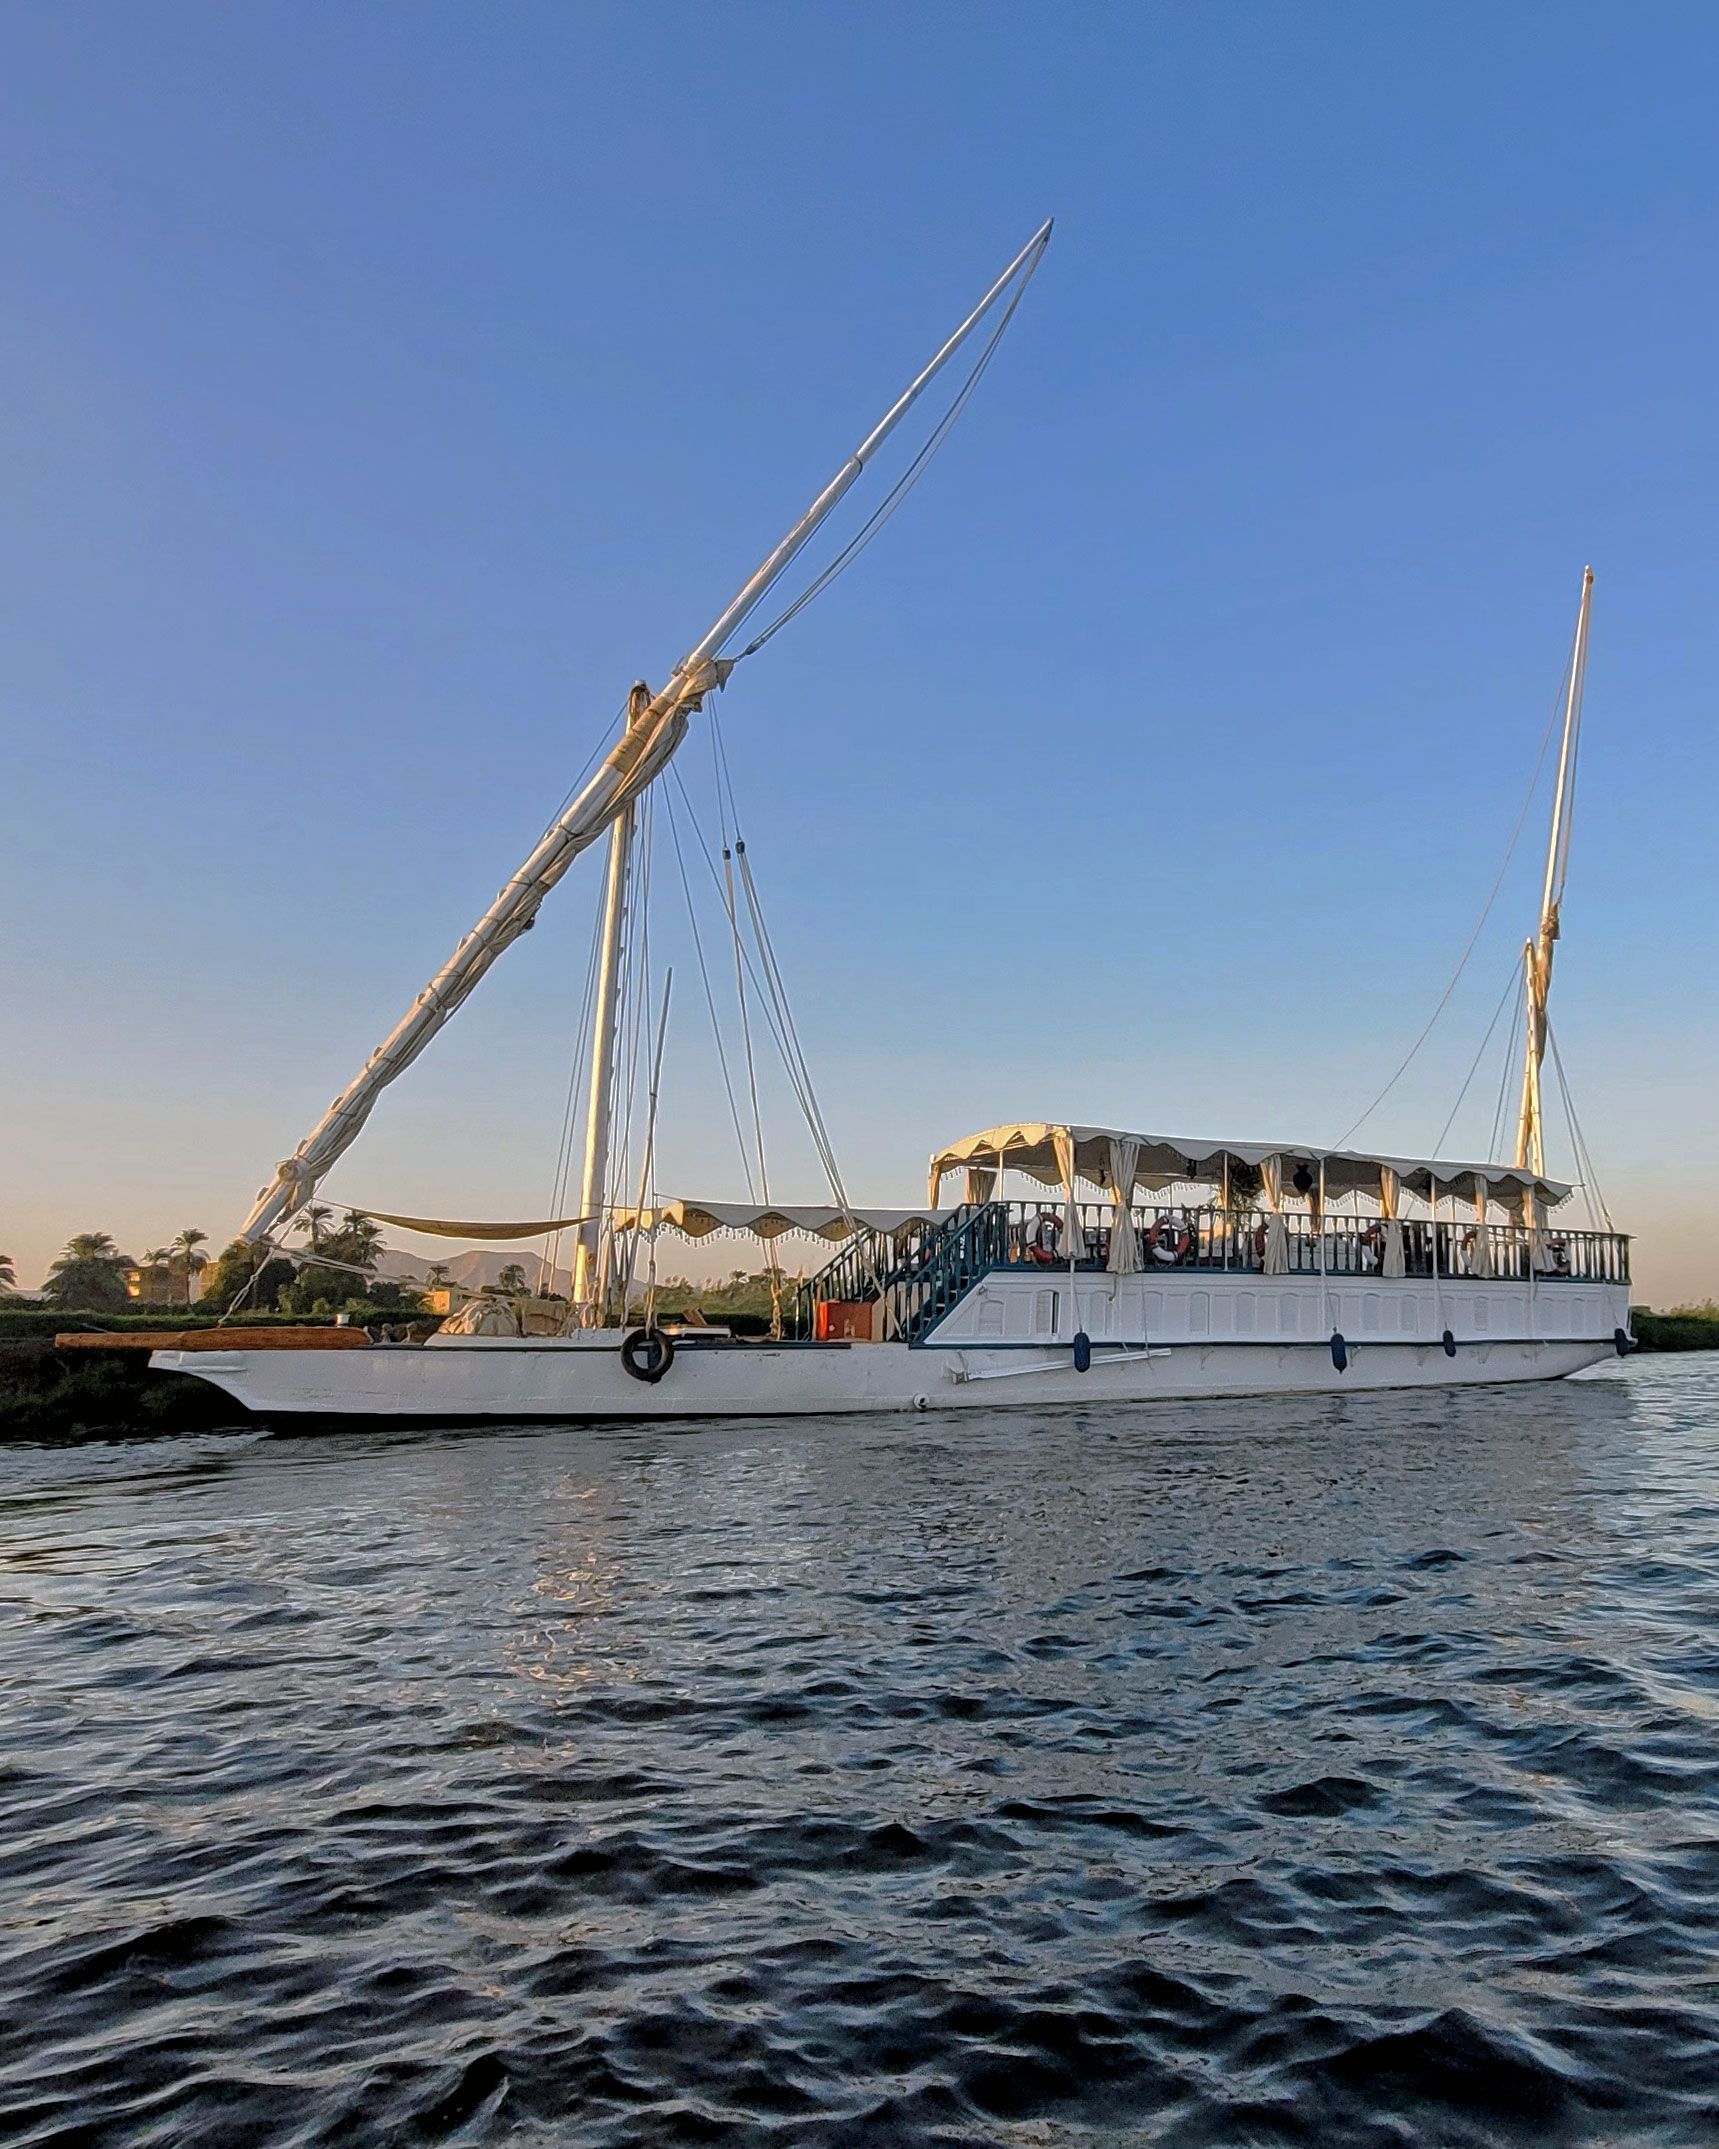 A picture of a traditional sailing boat on the Nile river, with a blue sky and green palm trees in the background. The boat is called the Dahabiya Kingfisher and it provides private cruises between Luxor and Aswan in Egypt, following the route of the original 1899 vessel.